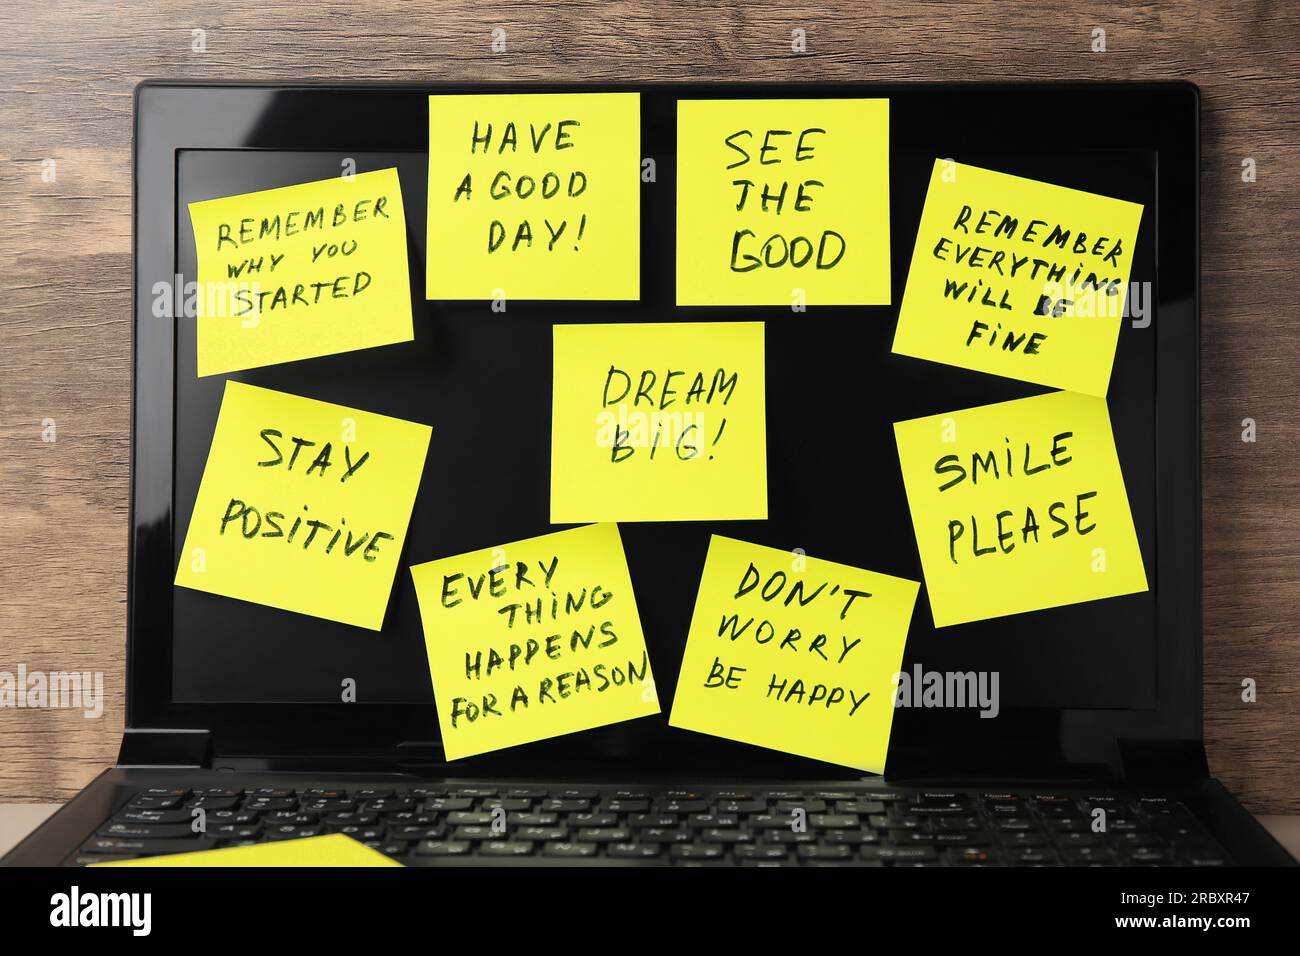 Paper notes of life-affirming phrases on laptop against wooden background Stock Photo